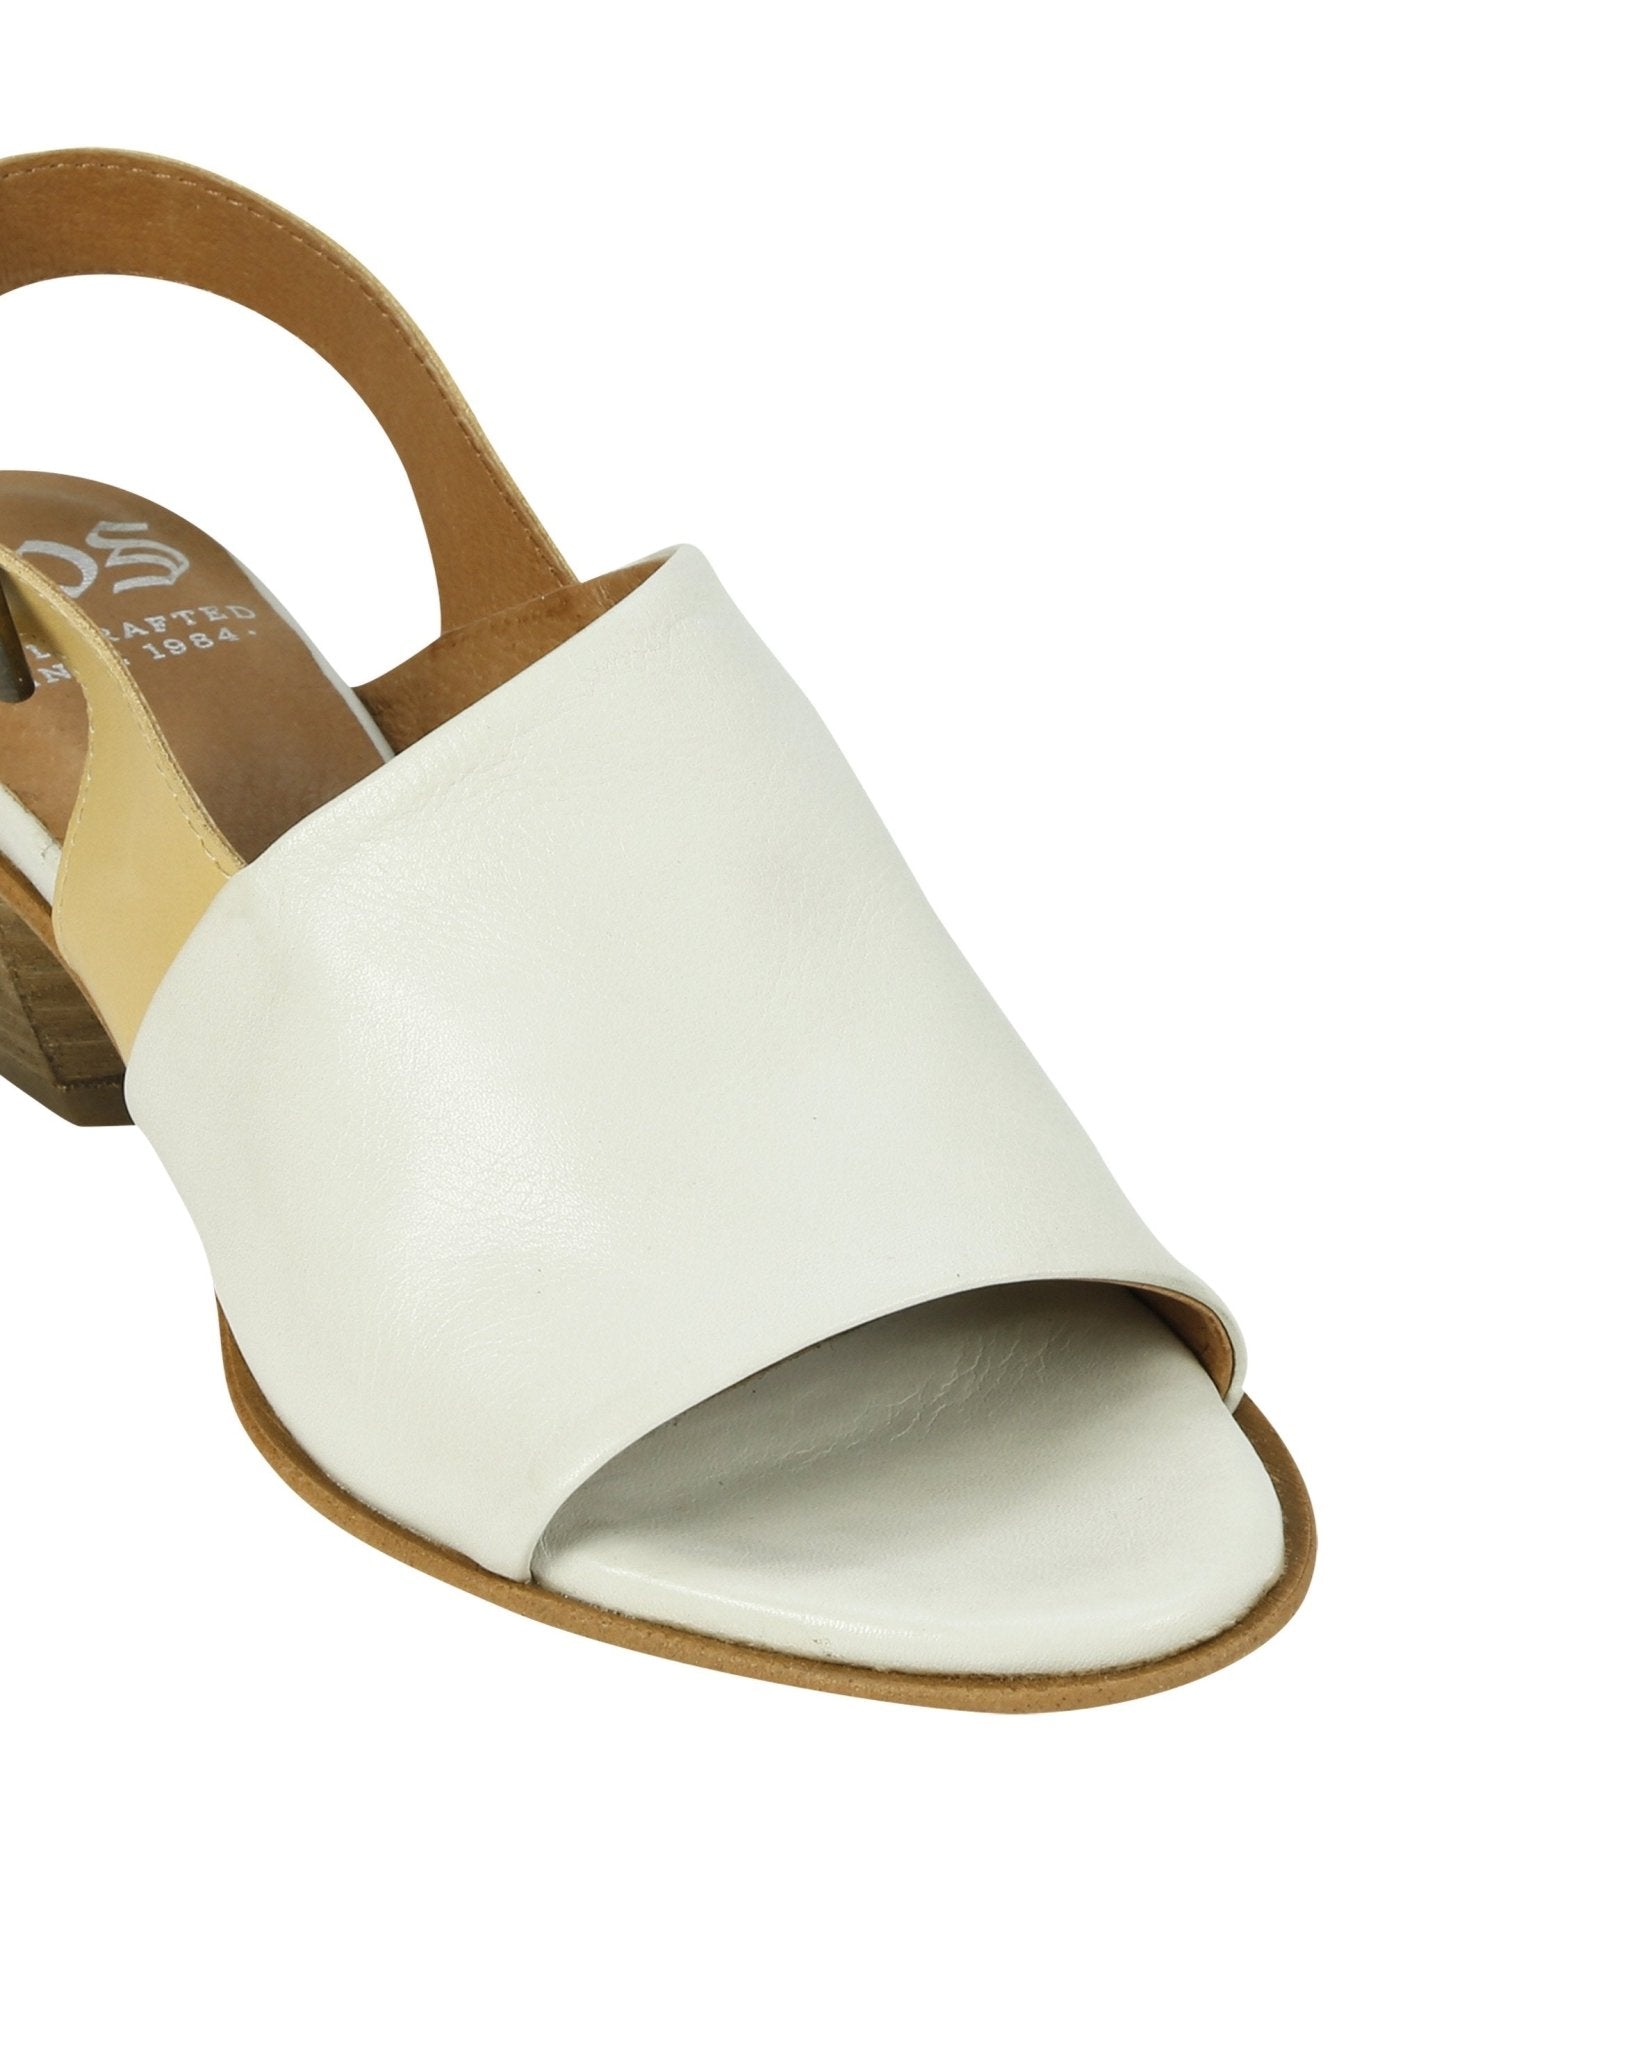 PAOLO - EOS Footwear - Sling Back Sandals #color_Cream/sand